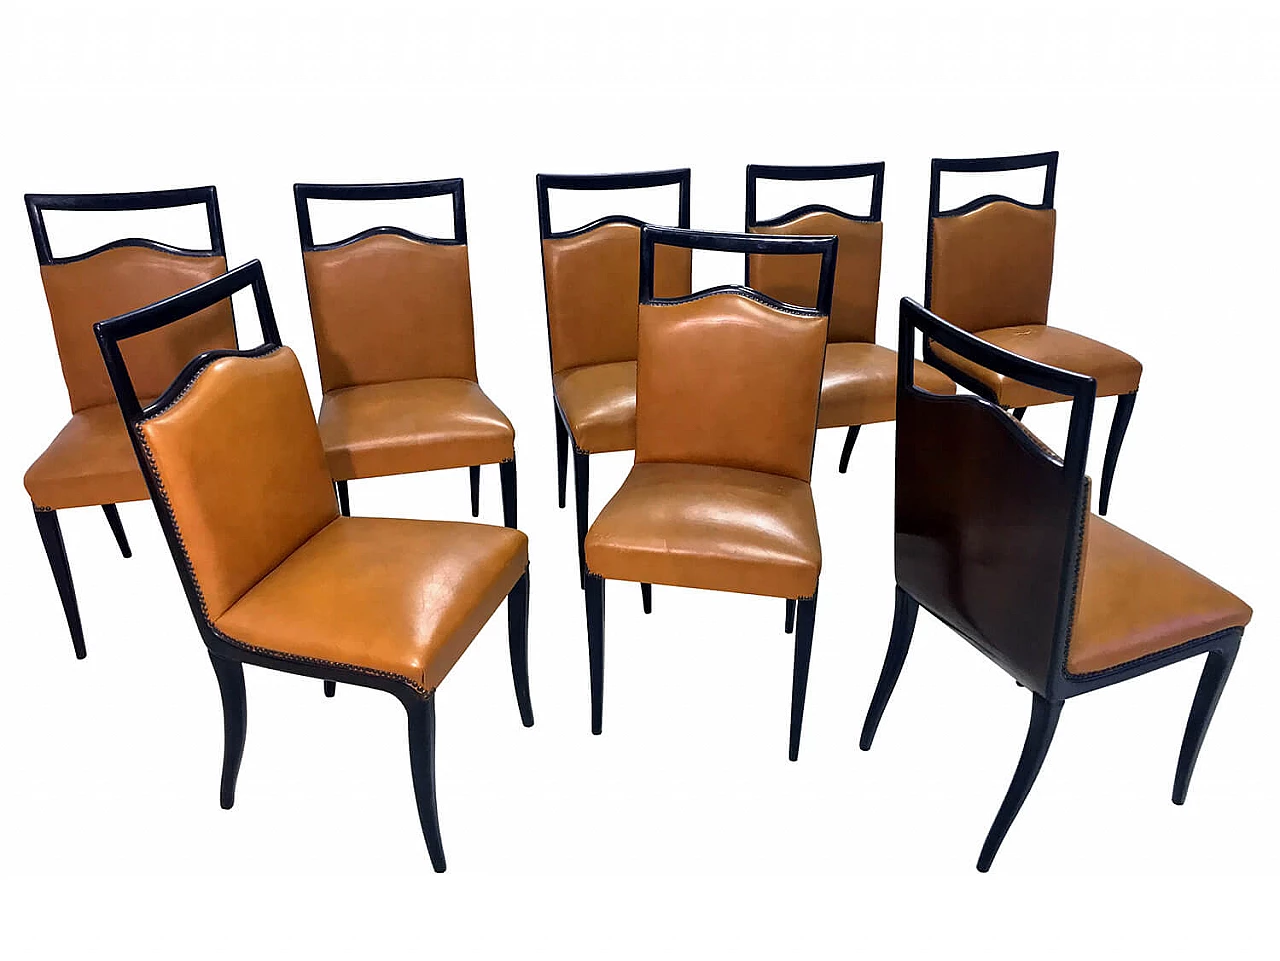 8 Rust-colored dining chairs by Vittorio Dassi, 1950s 1356966